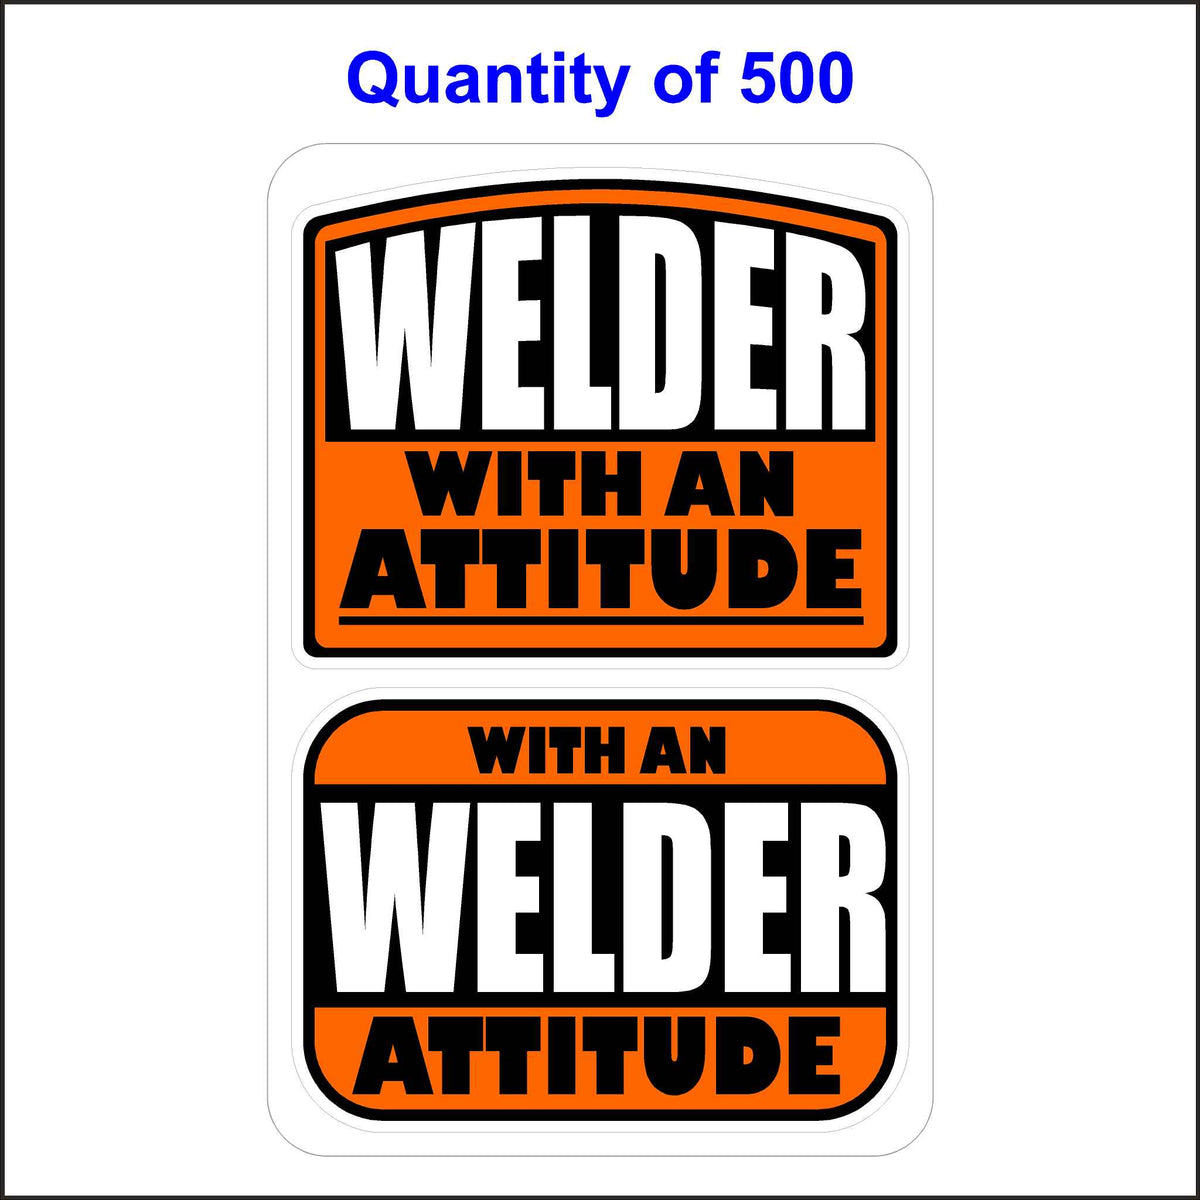 Welder With An Attitude Stickers 500 Quantity.